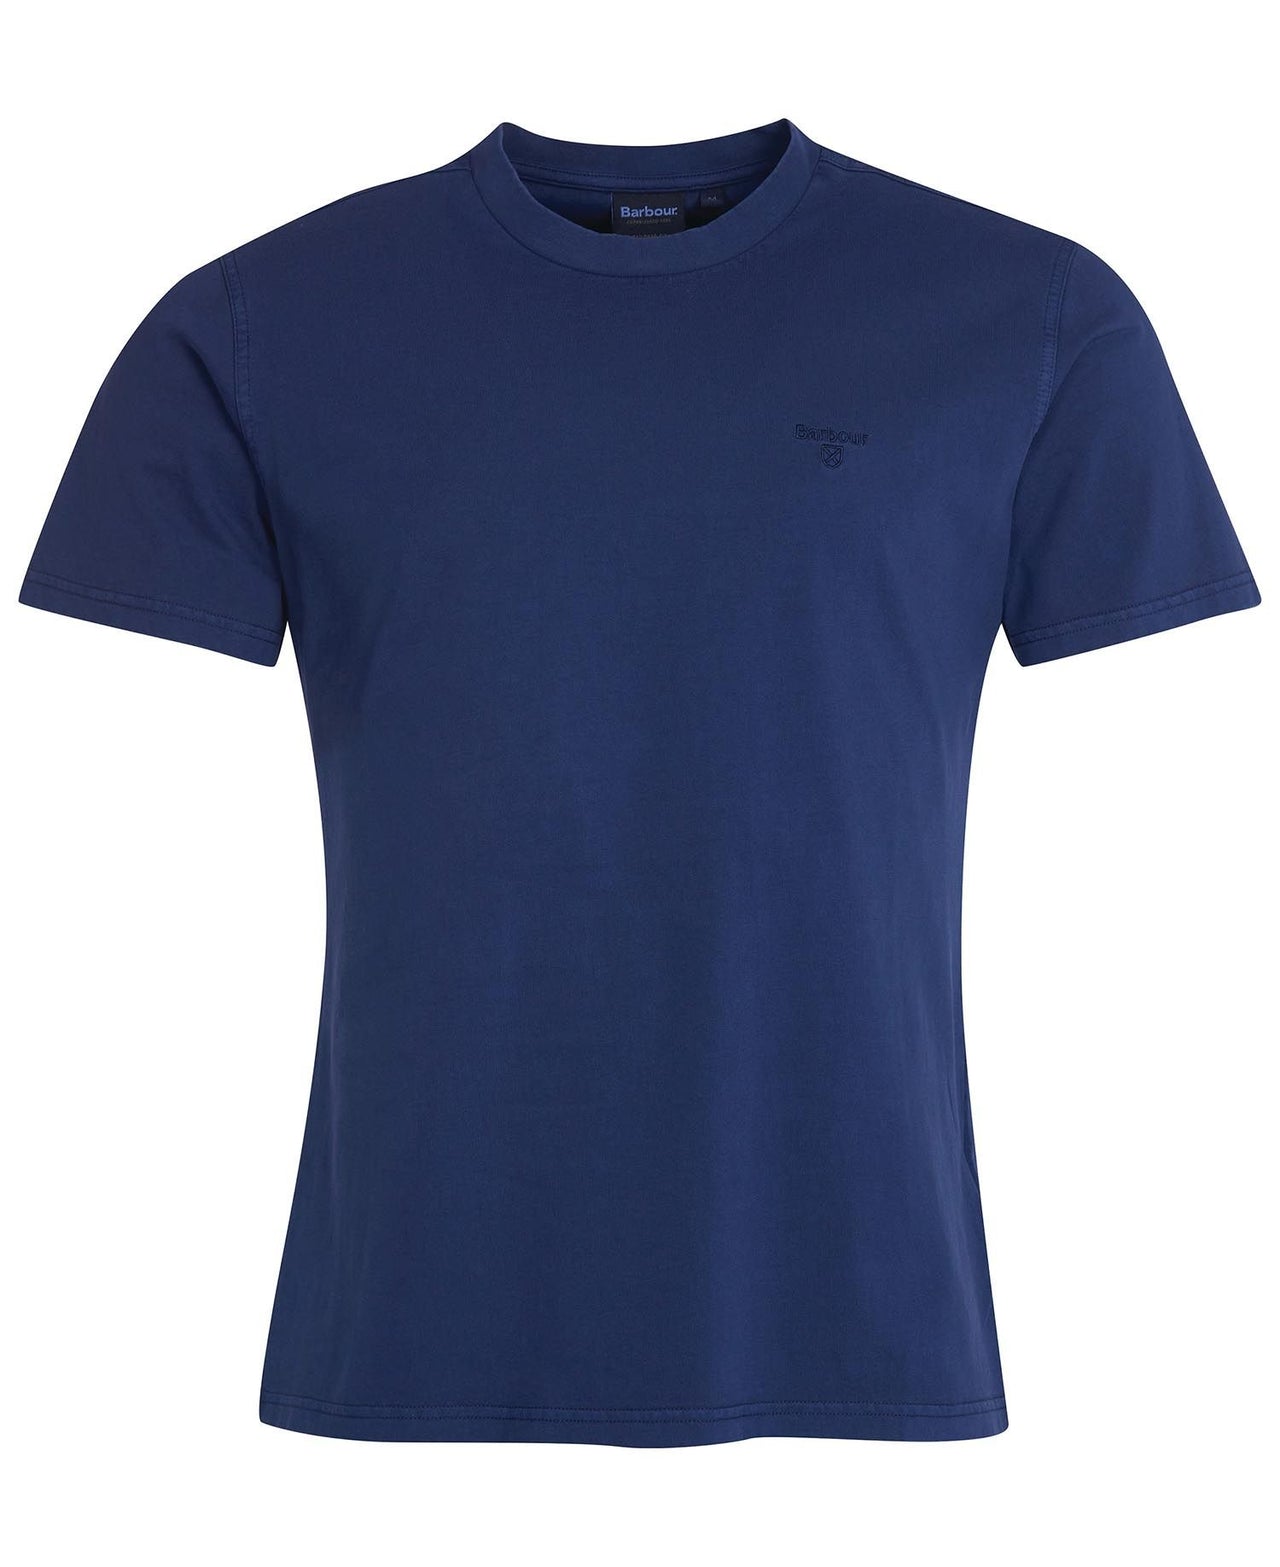 BARBOUR Garment Dyed T-Shirt NAVY